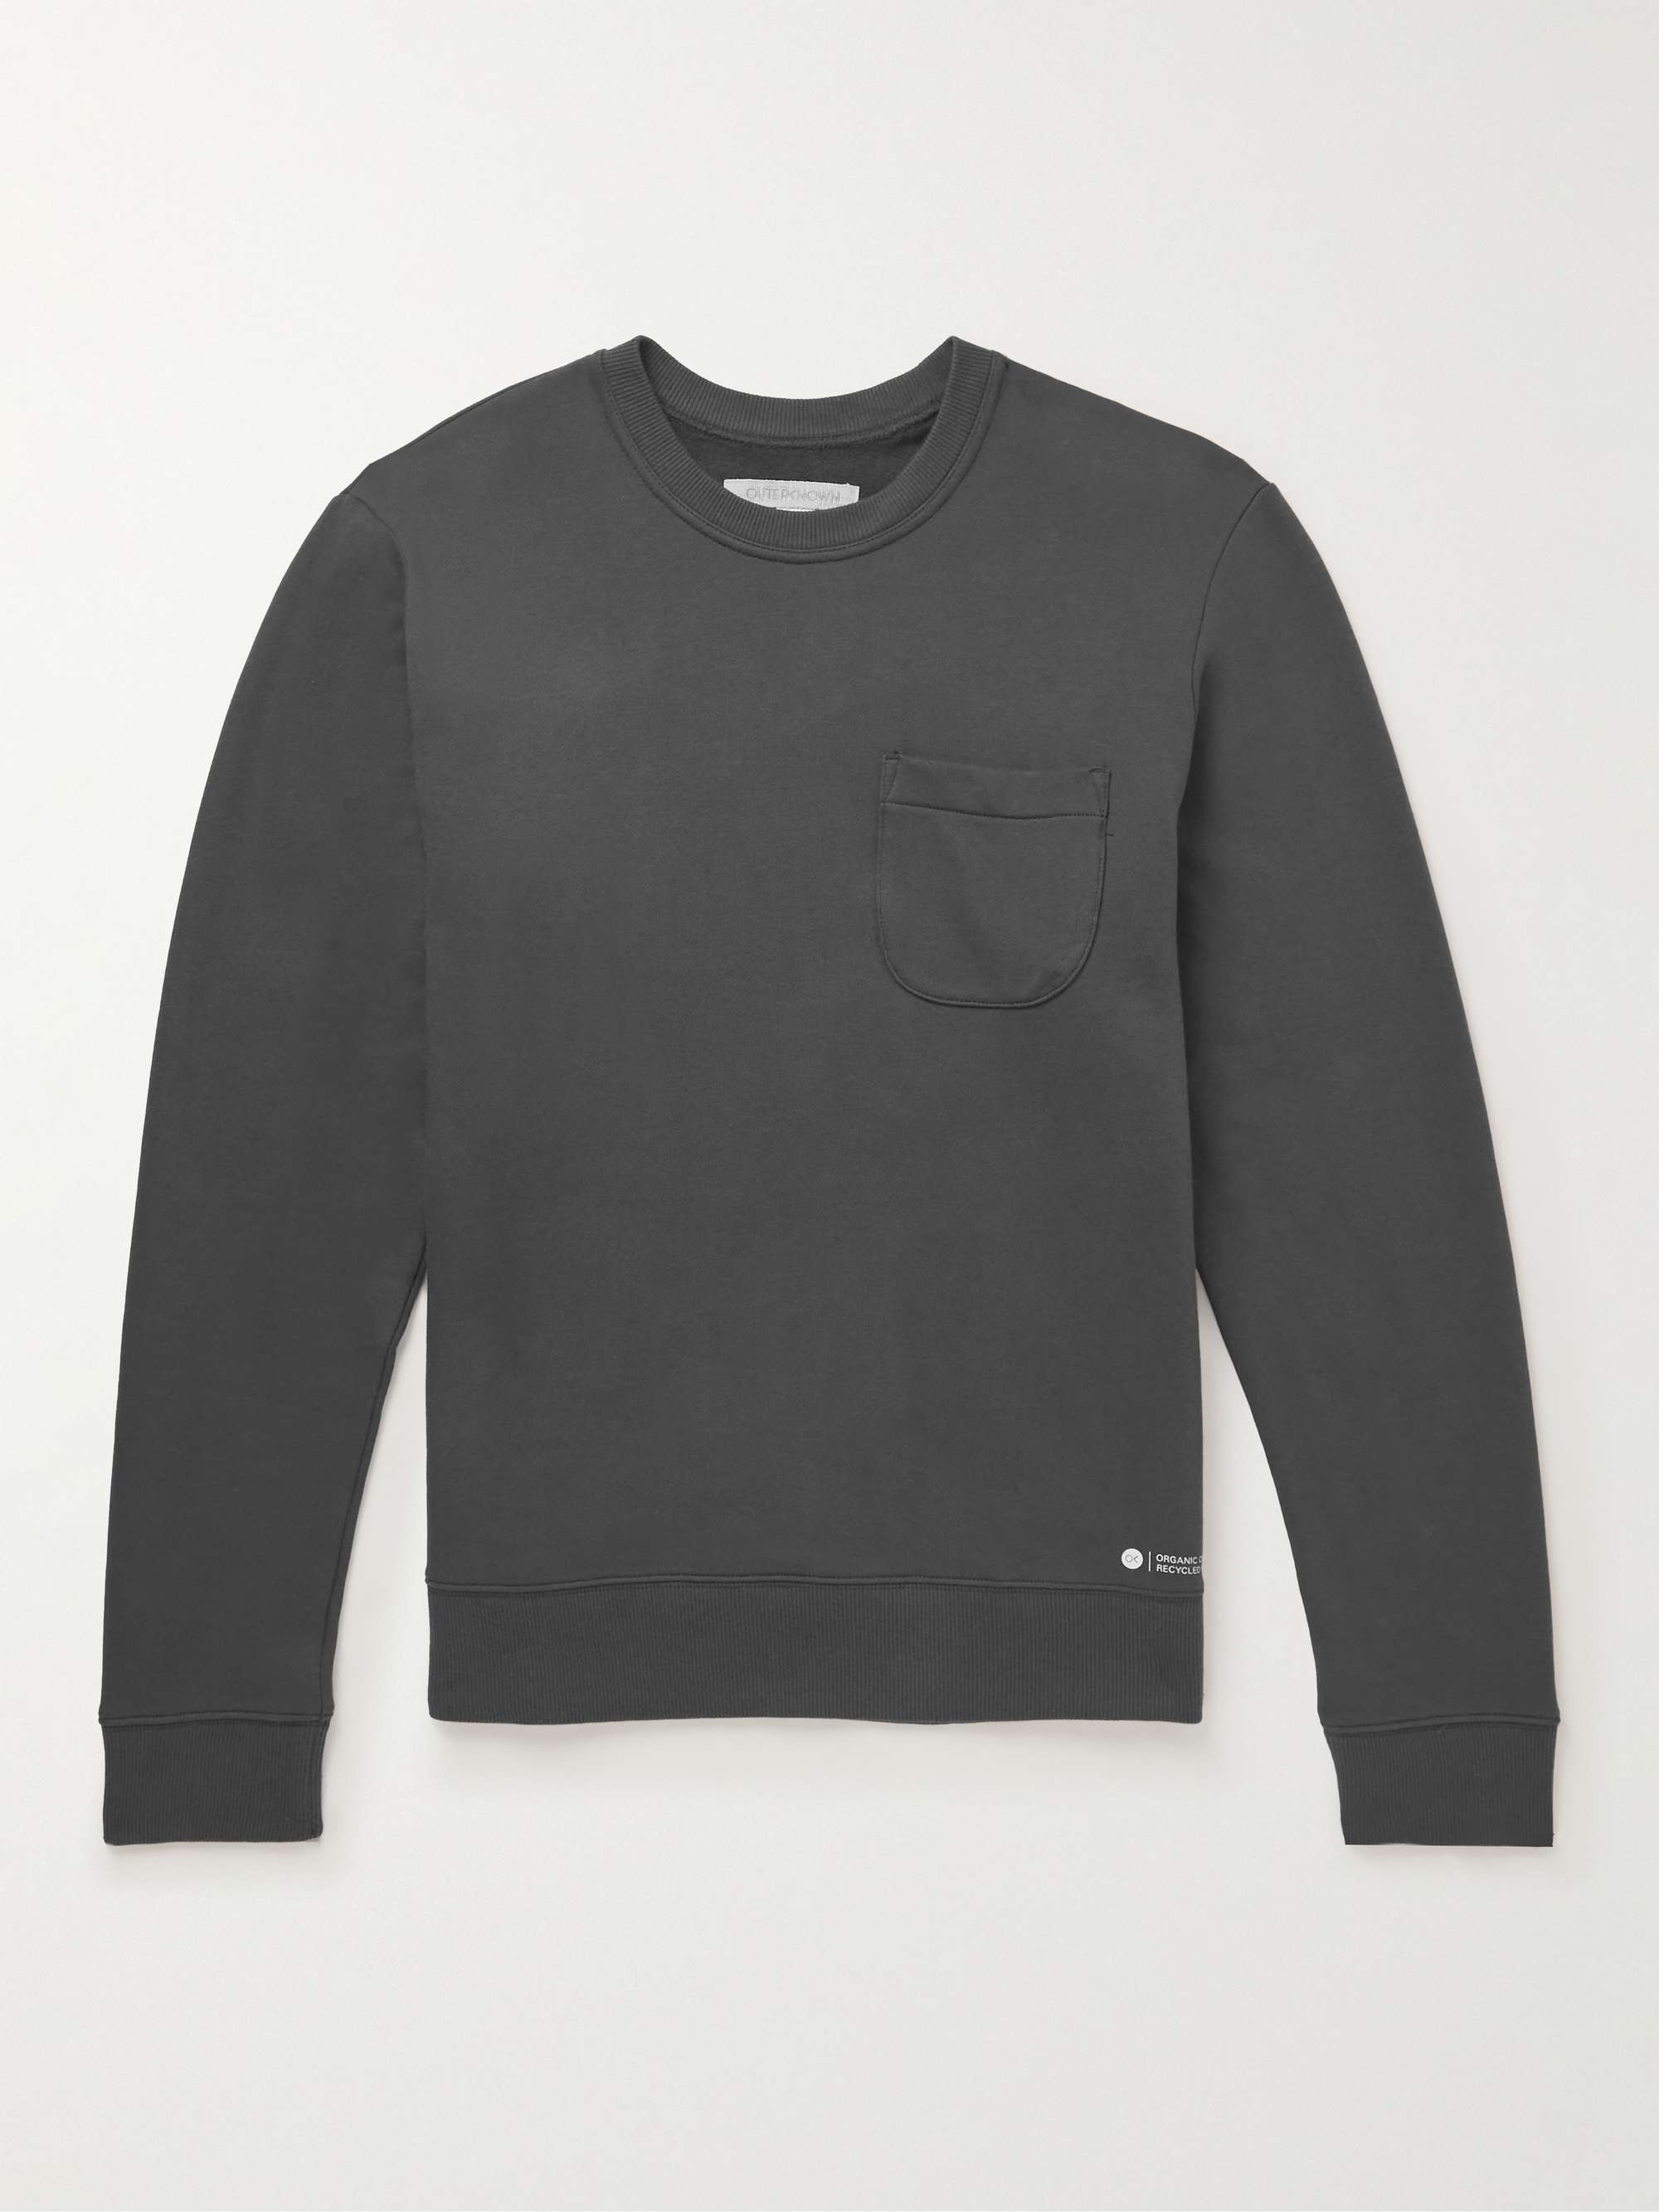 OUTERKNOWN All-Day Organic Cotton-Blend Jersey Sweatshirt